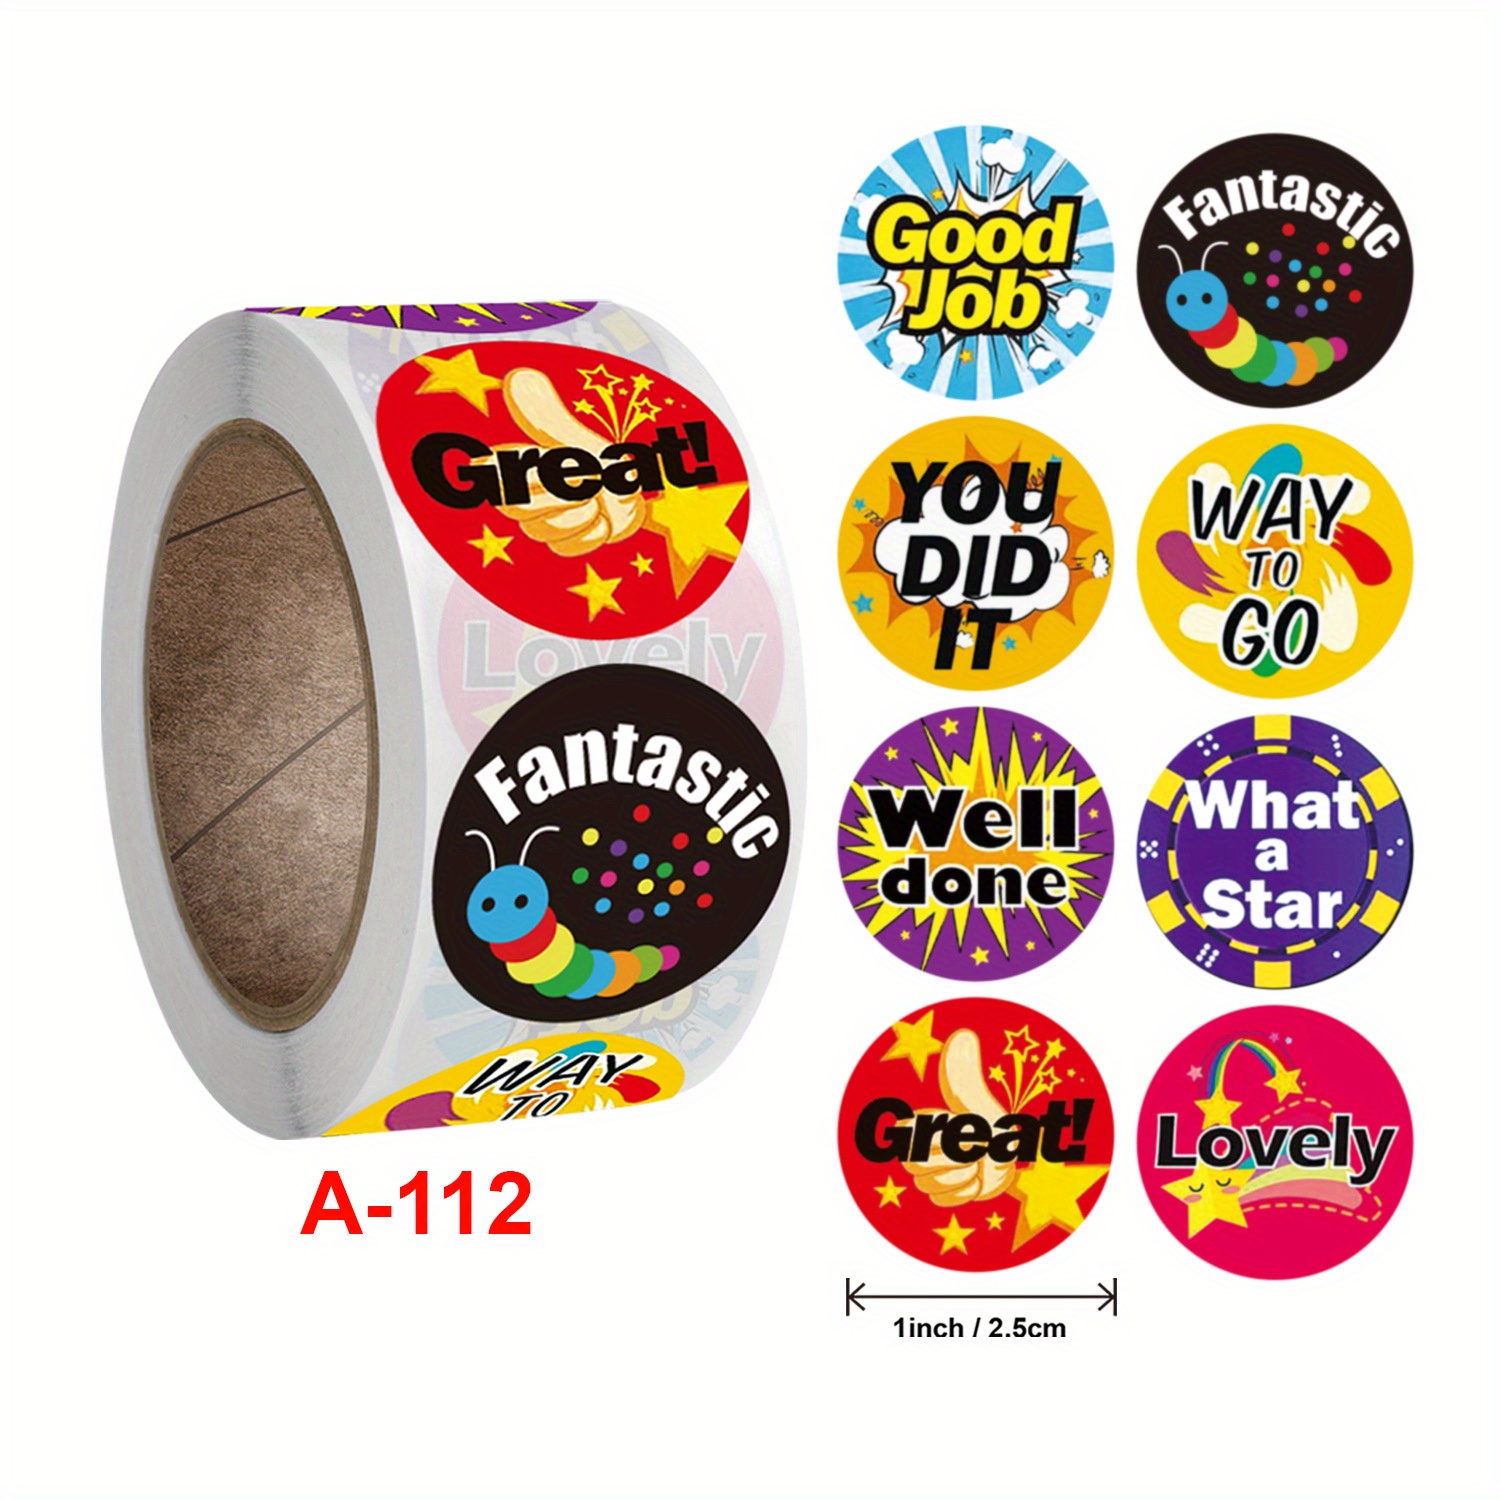 500 Incentive Stickers Adorable Round Encouraging Stickers Teacher